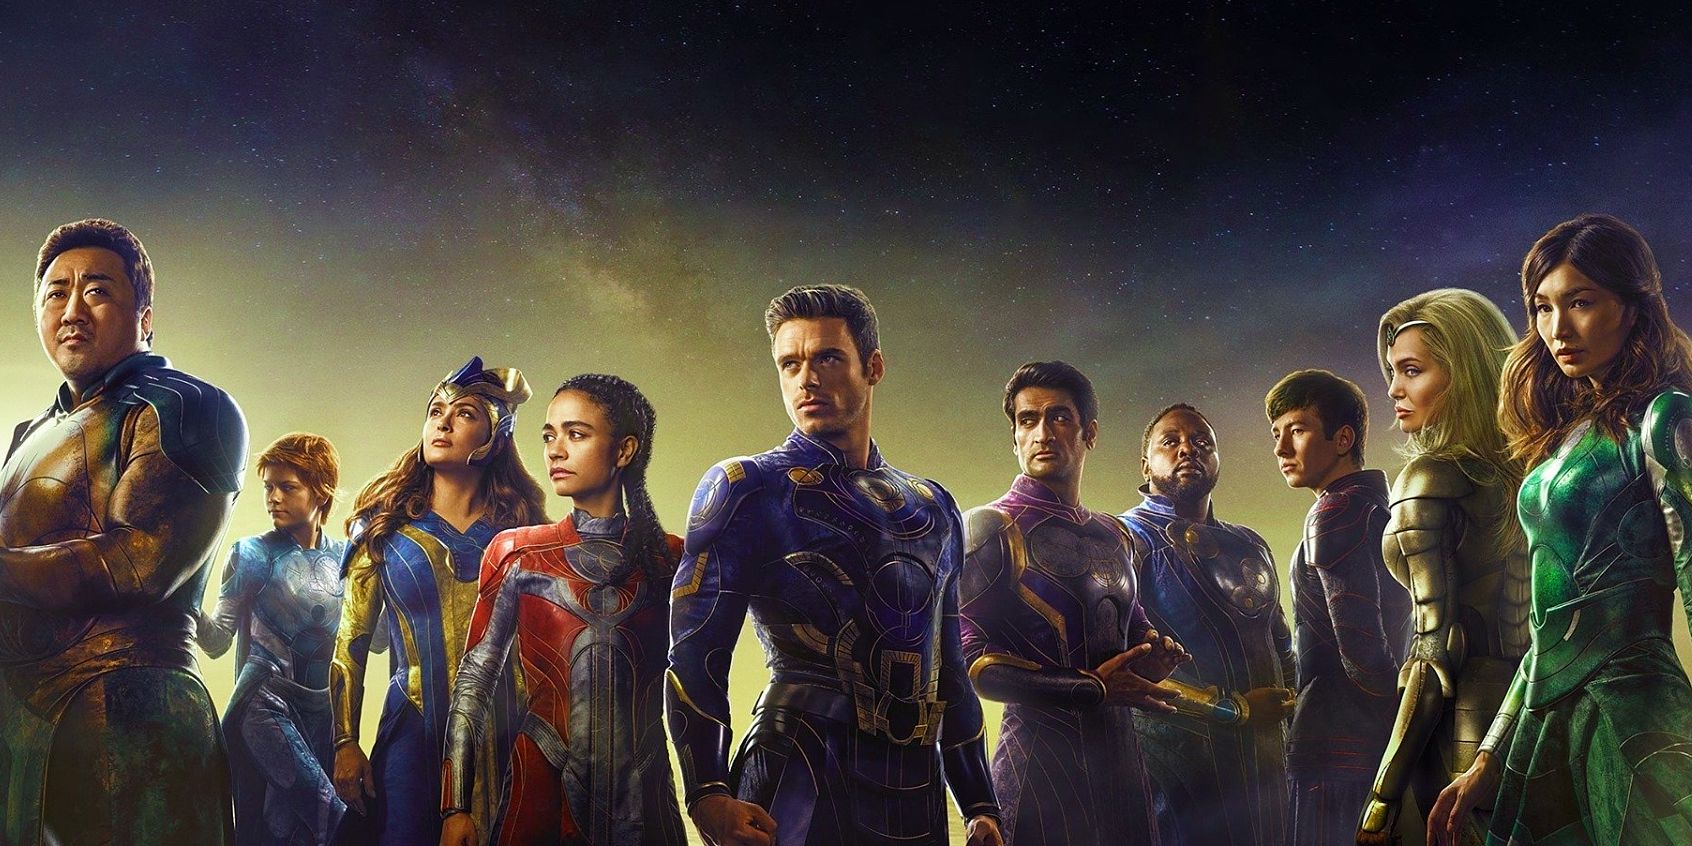 Posters for Eternals showing the main characters